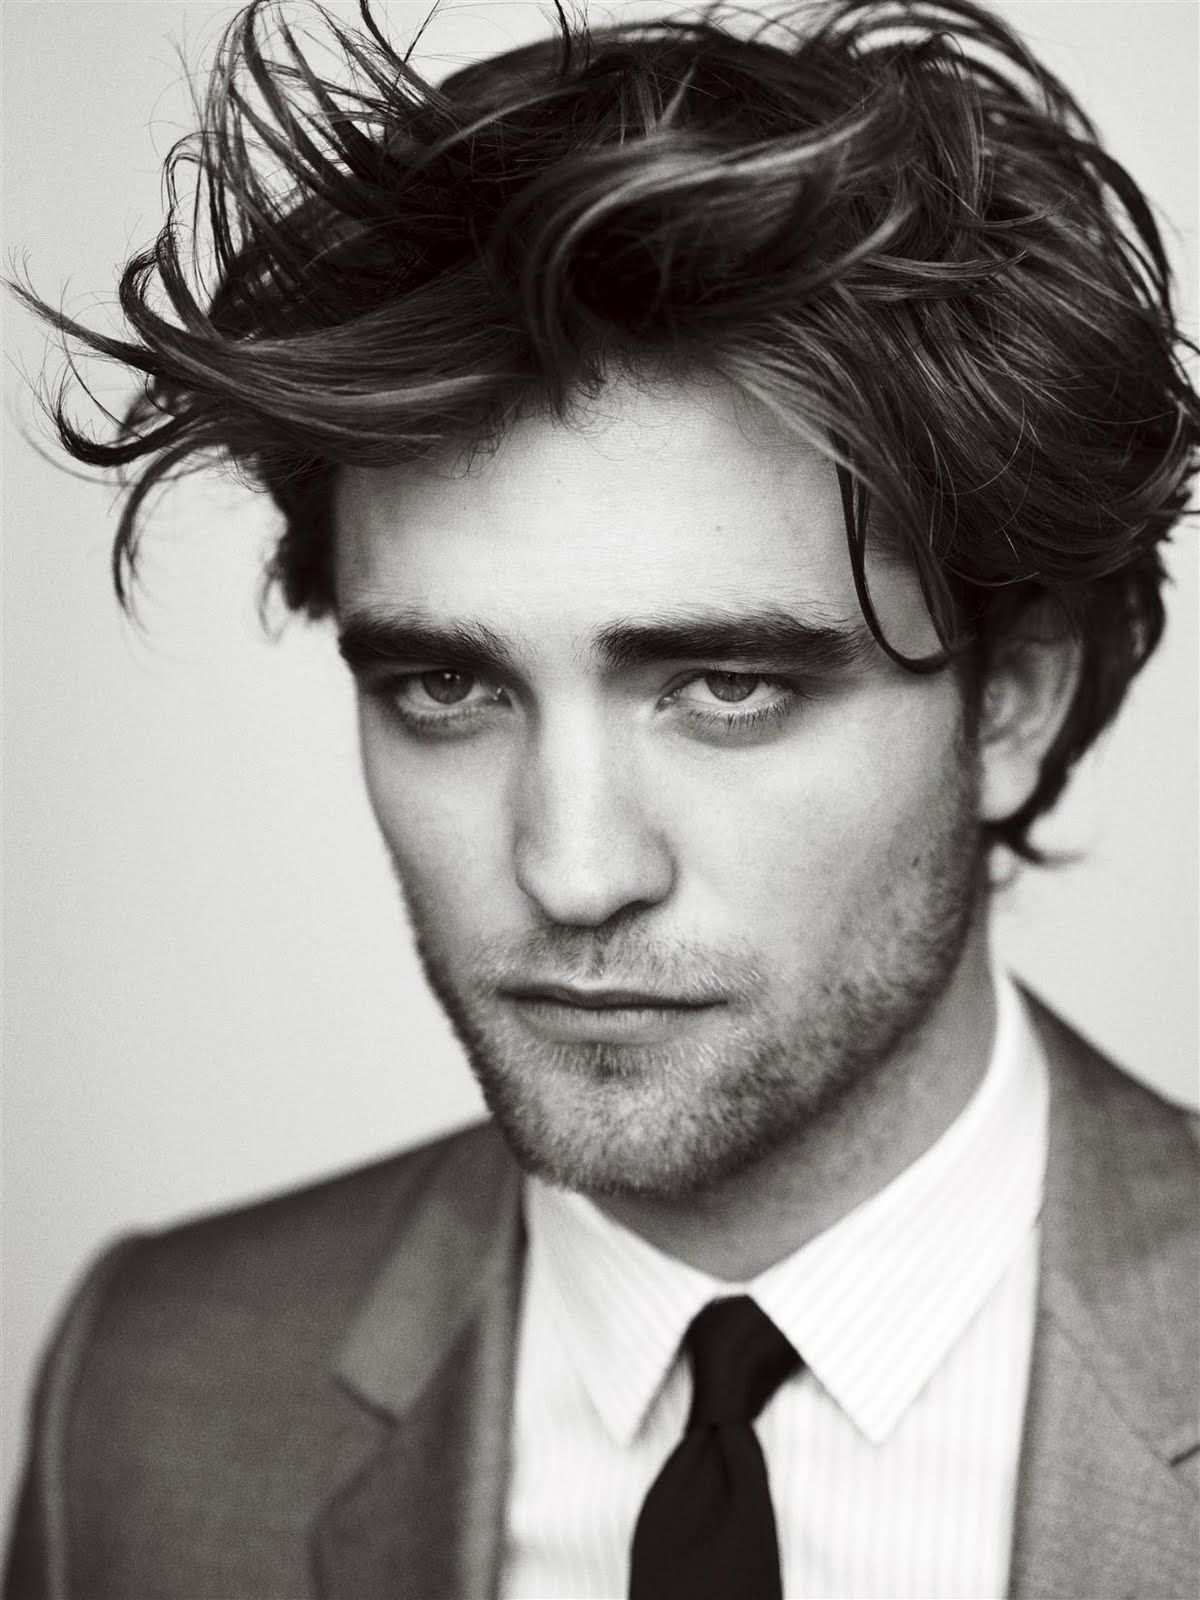 Robert Pattinson News: Sexy & Sweet: GQ Outtakes Now In HQ1200 x 1600